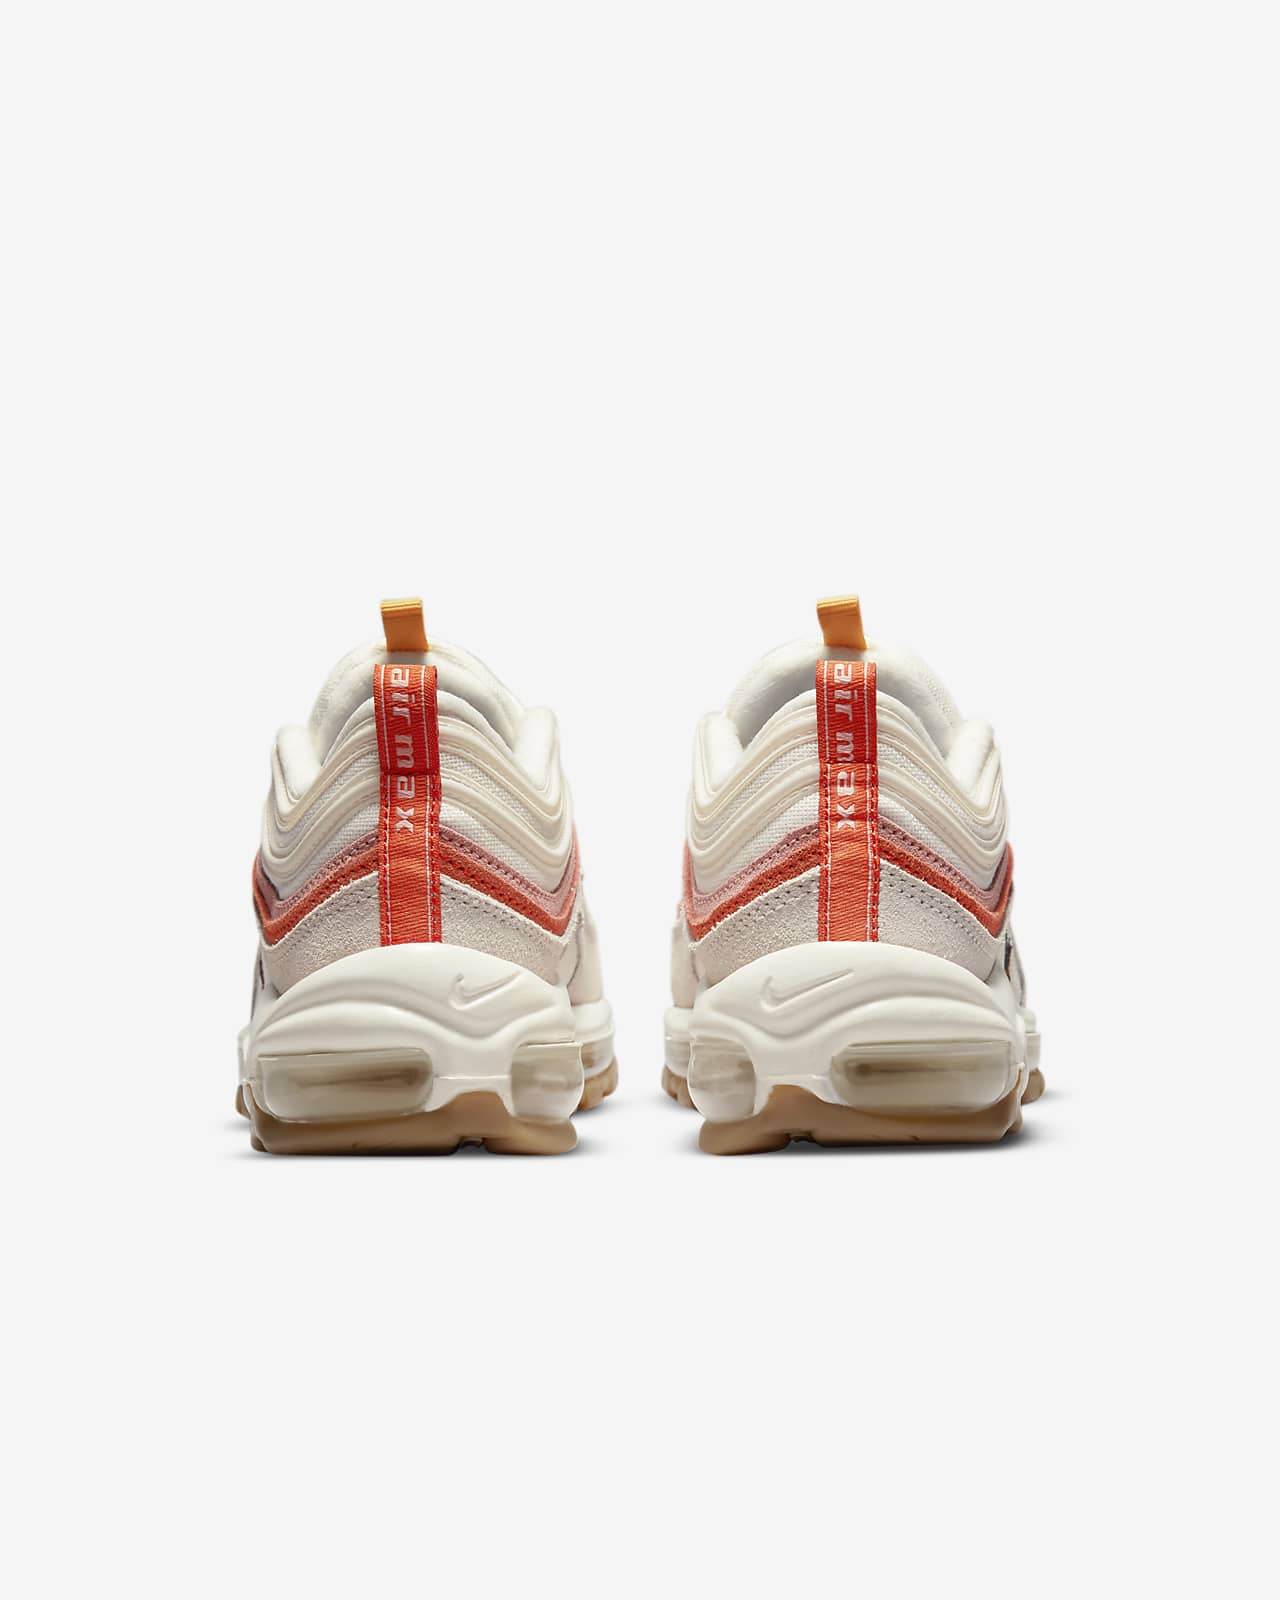 Nike Air Max 97 Women's Shoes سوليتير خاتم